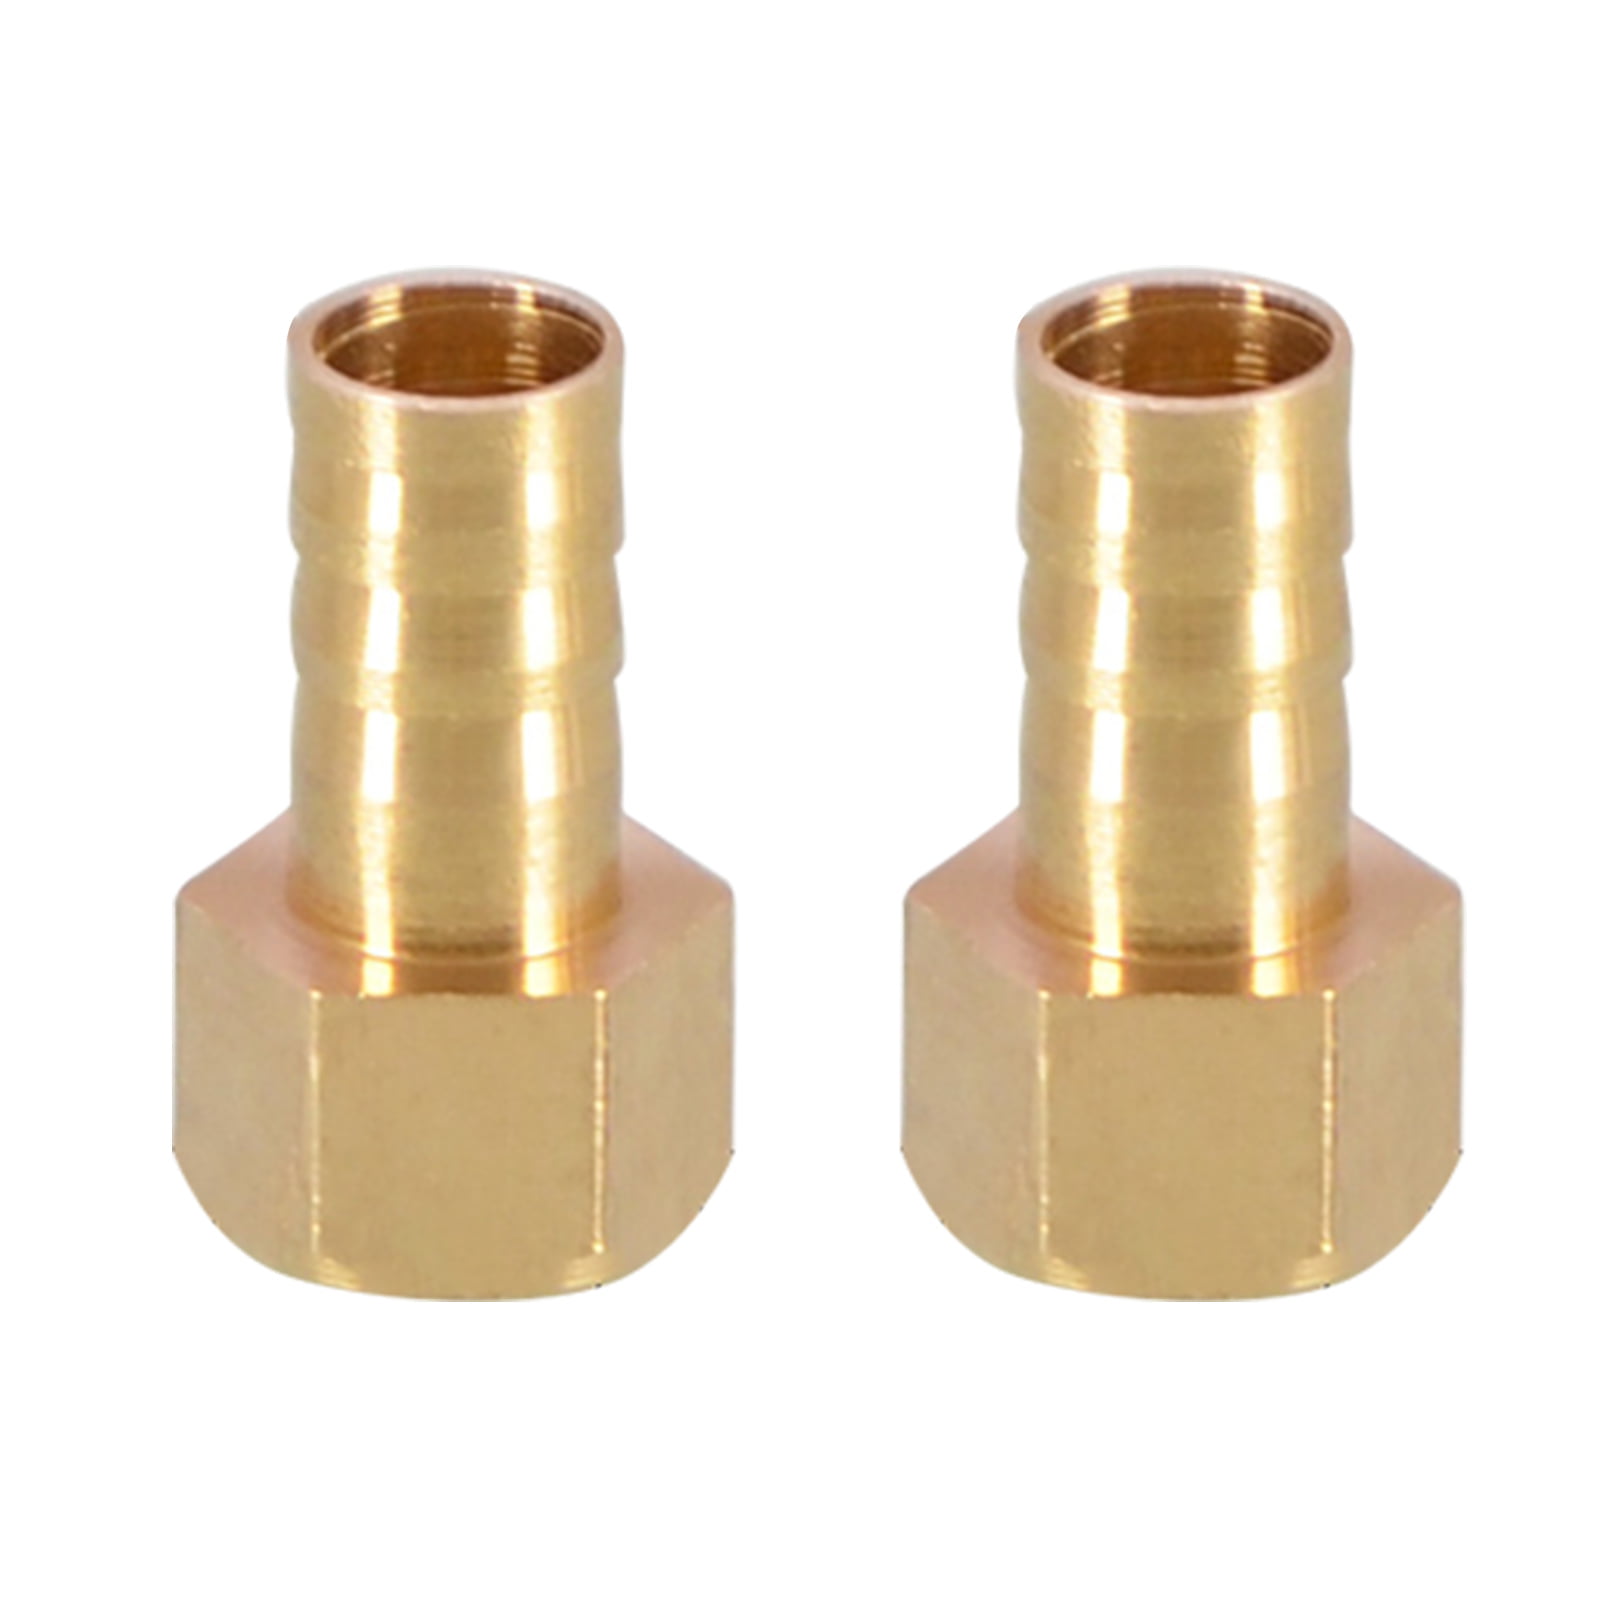 2pcs Garden Water Hose Pipe Fitting Tap Adaptor Connector 12mm 